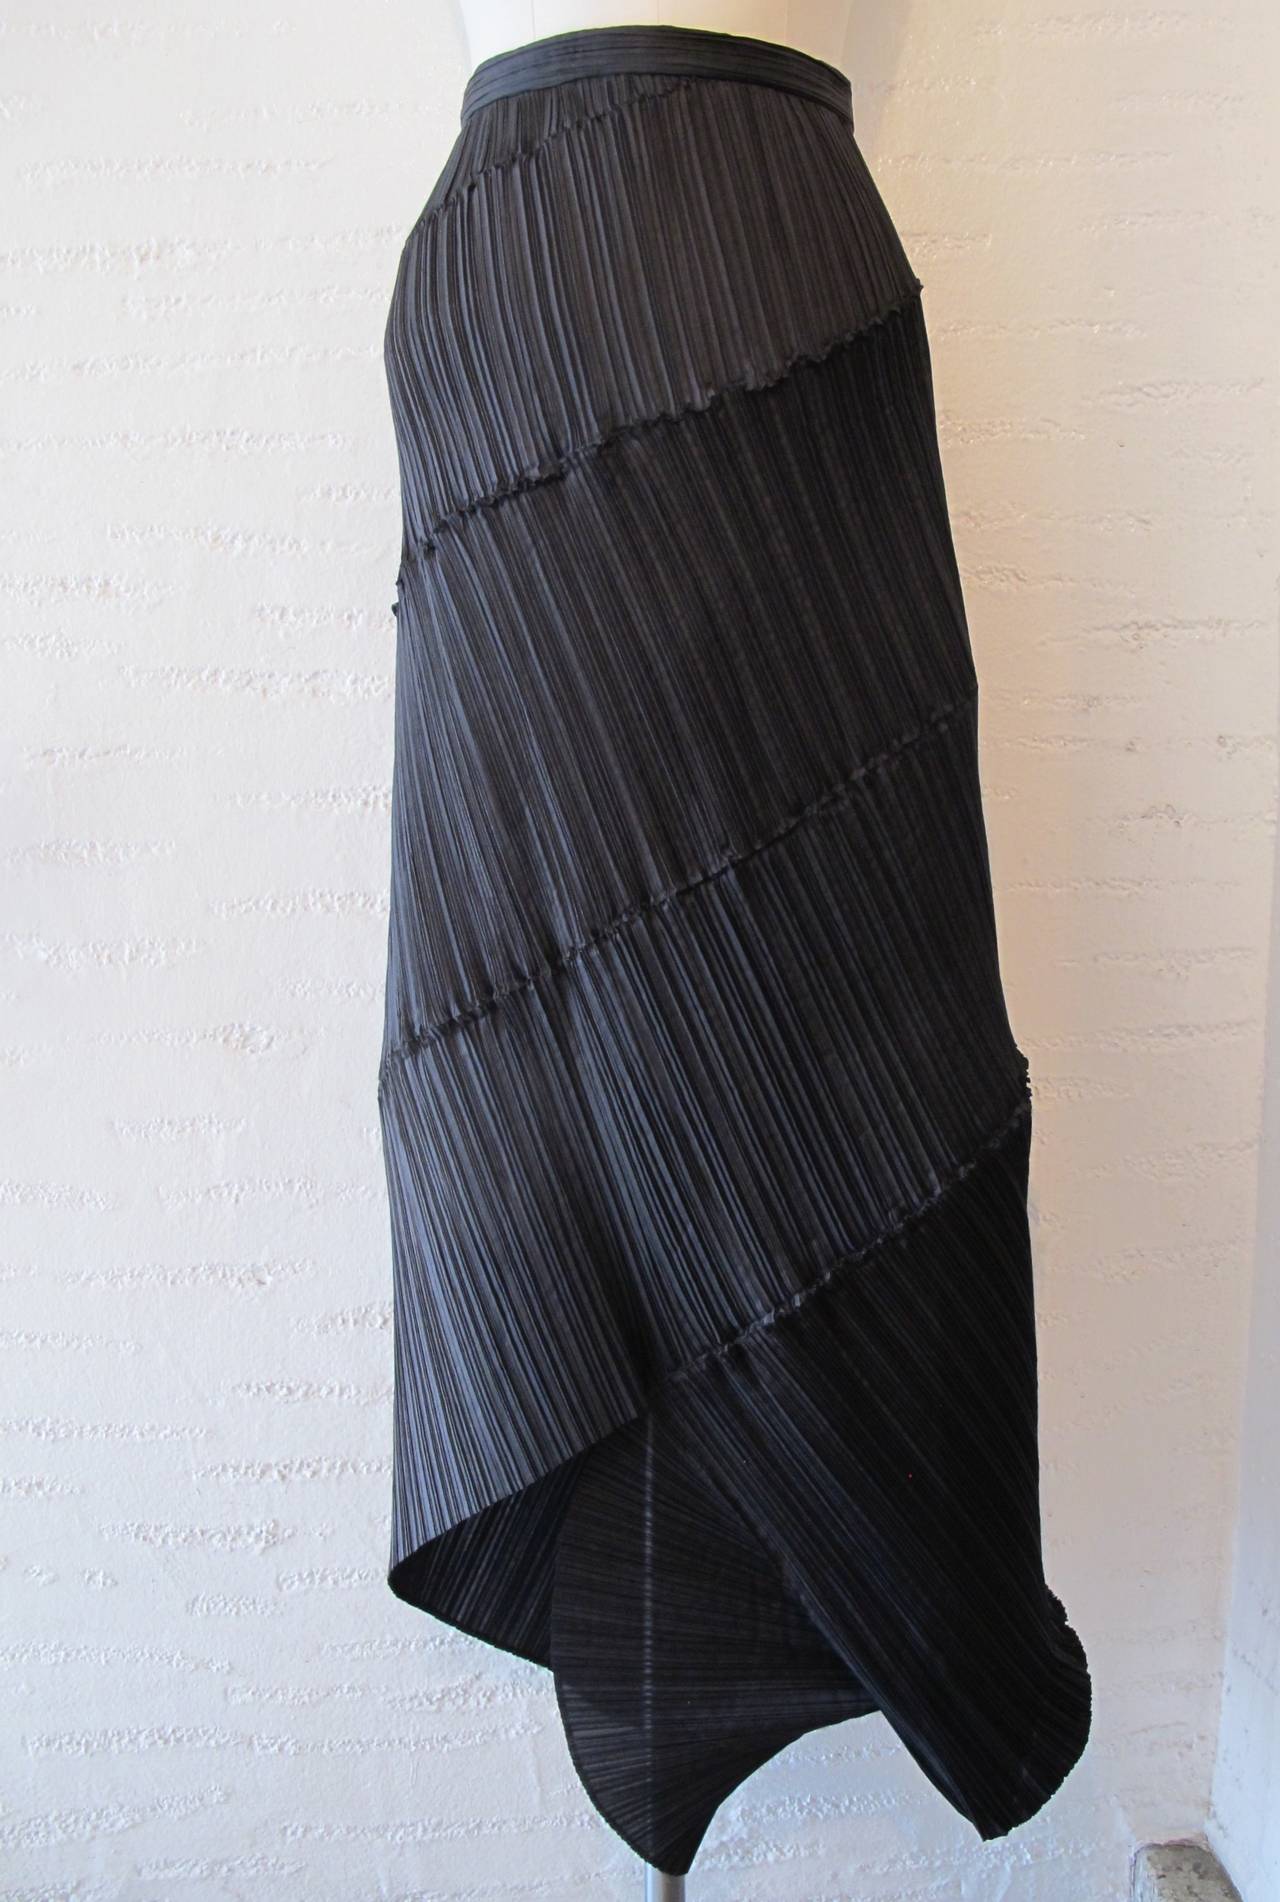 The DNA of this fabulous asymmetric black skirt is freedom of movement and the shape of the human form. The intertwining of the pleats is genius. When worn, it is striking and the stretch of the iconic pleats contours to the body highlighting its